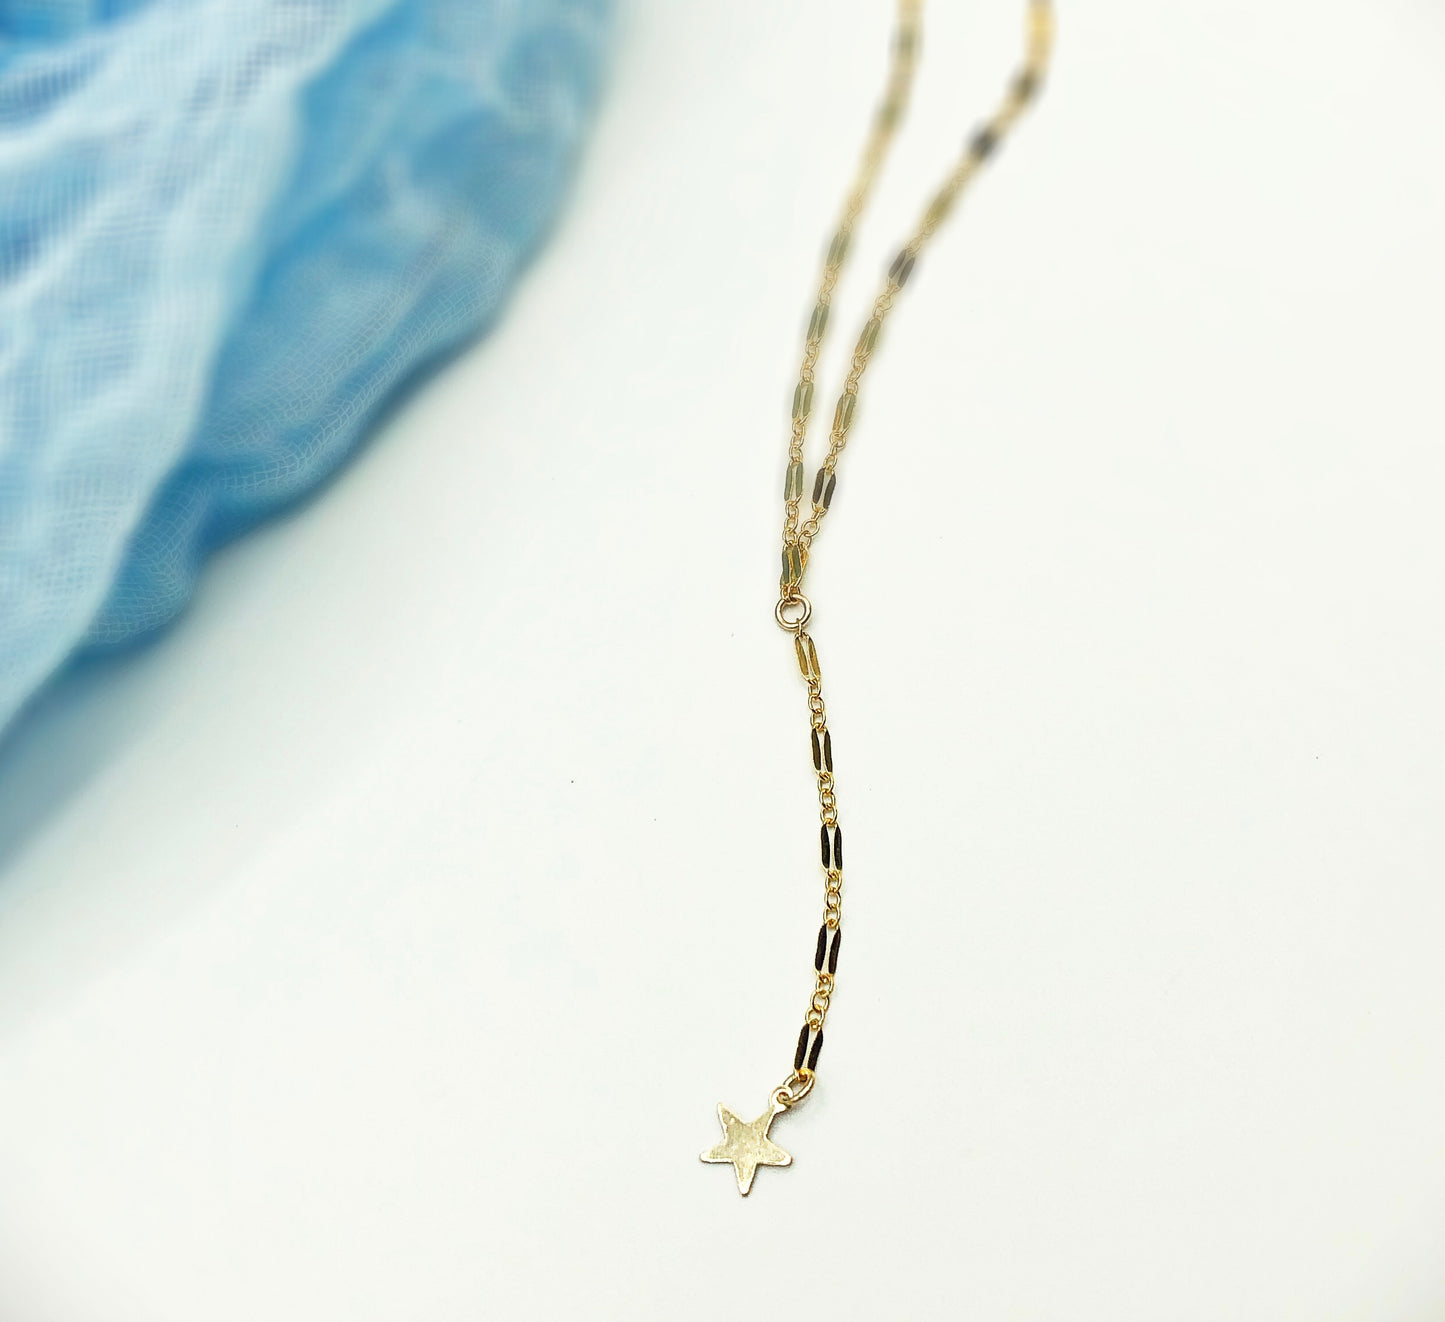 Starry Night Lariat - Blue Sky Feathers